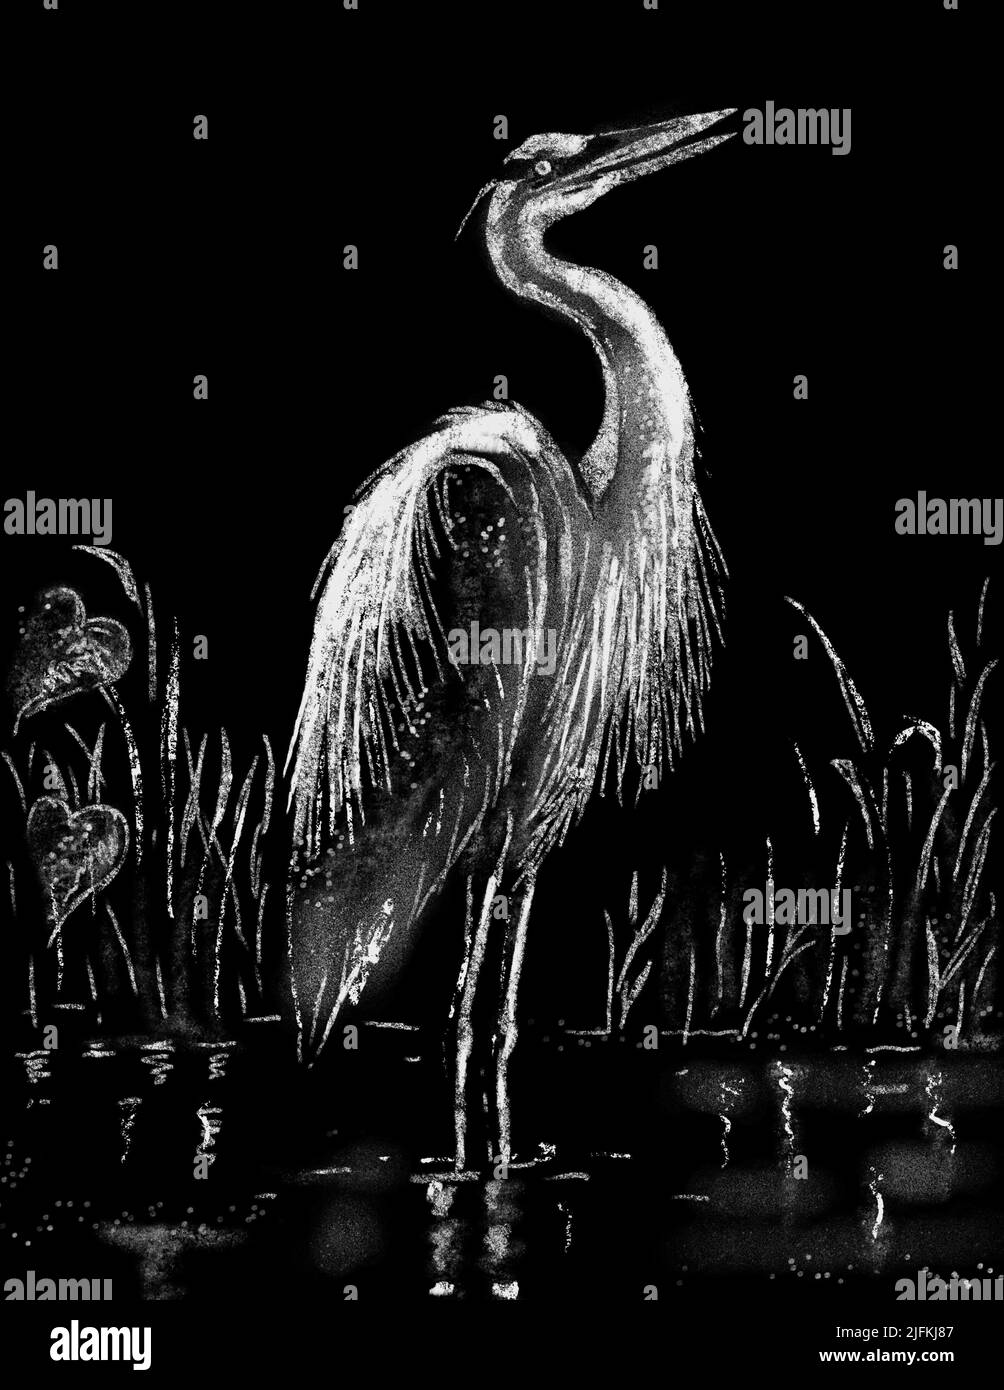 Chalk or pastel art drawing illustration of great blue heron, Ardea herodias, a large wading bird in the heron family Ardeidae, standing open water, Stock Photo